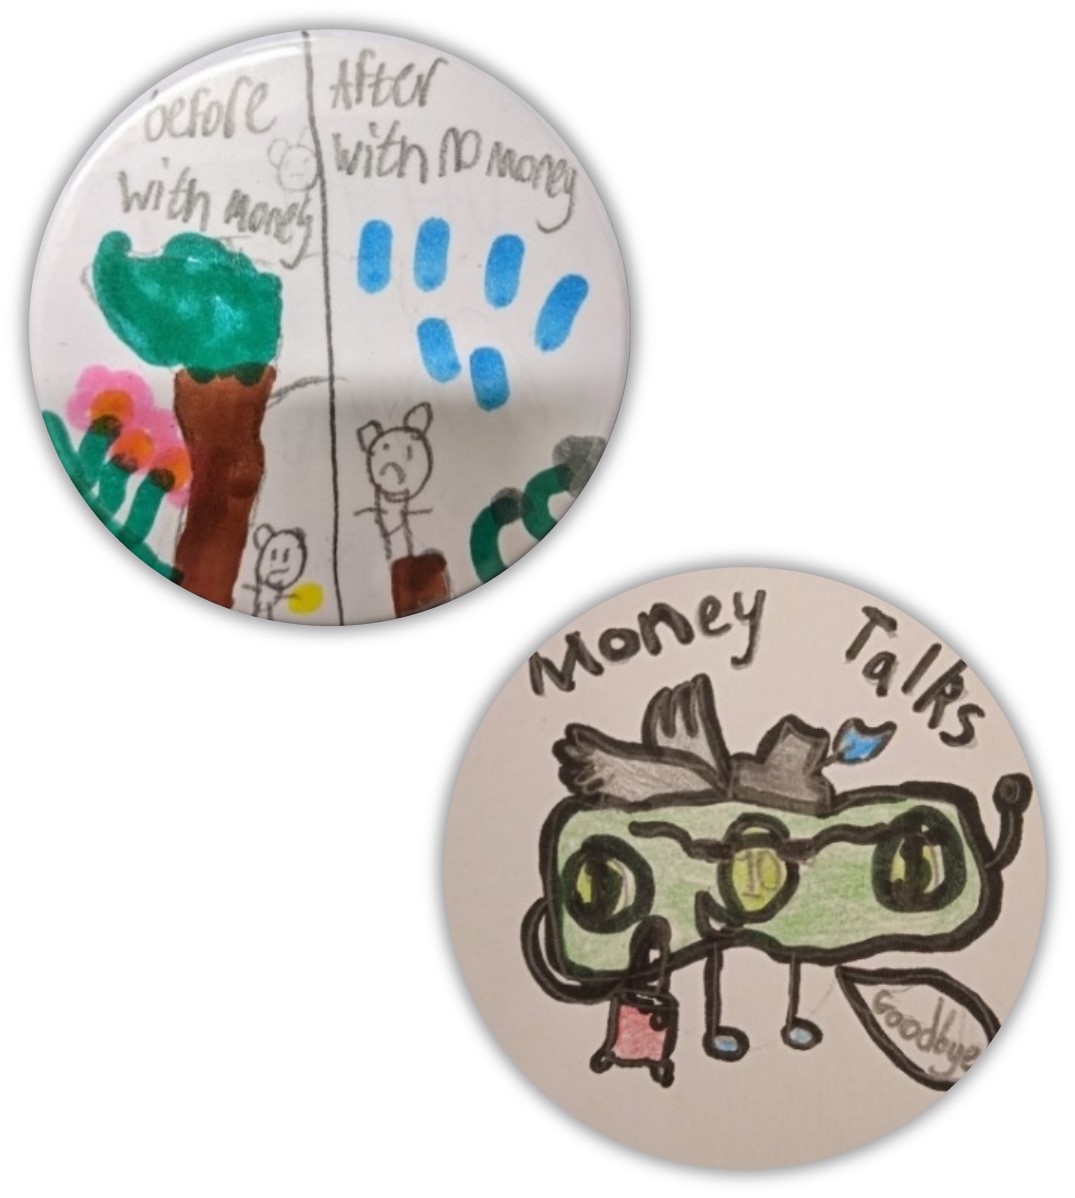 Two more money badge designs